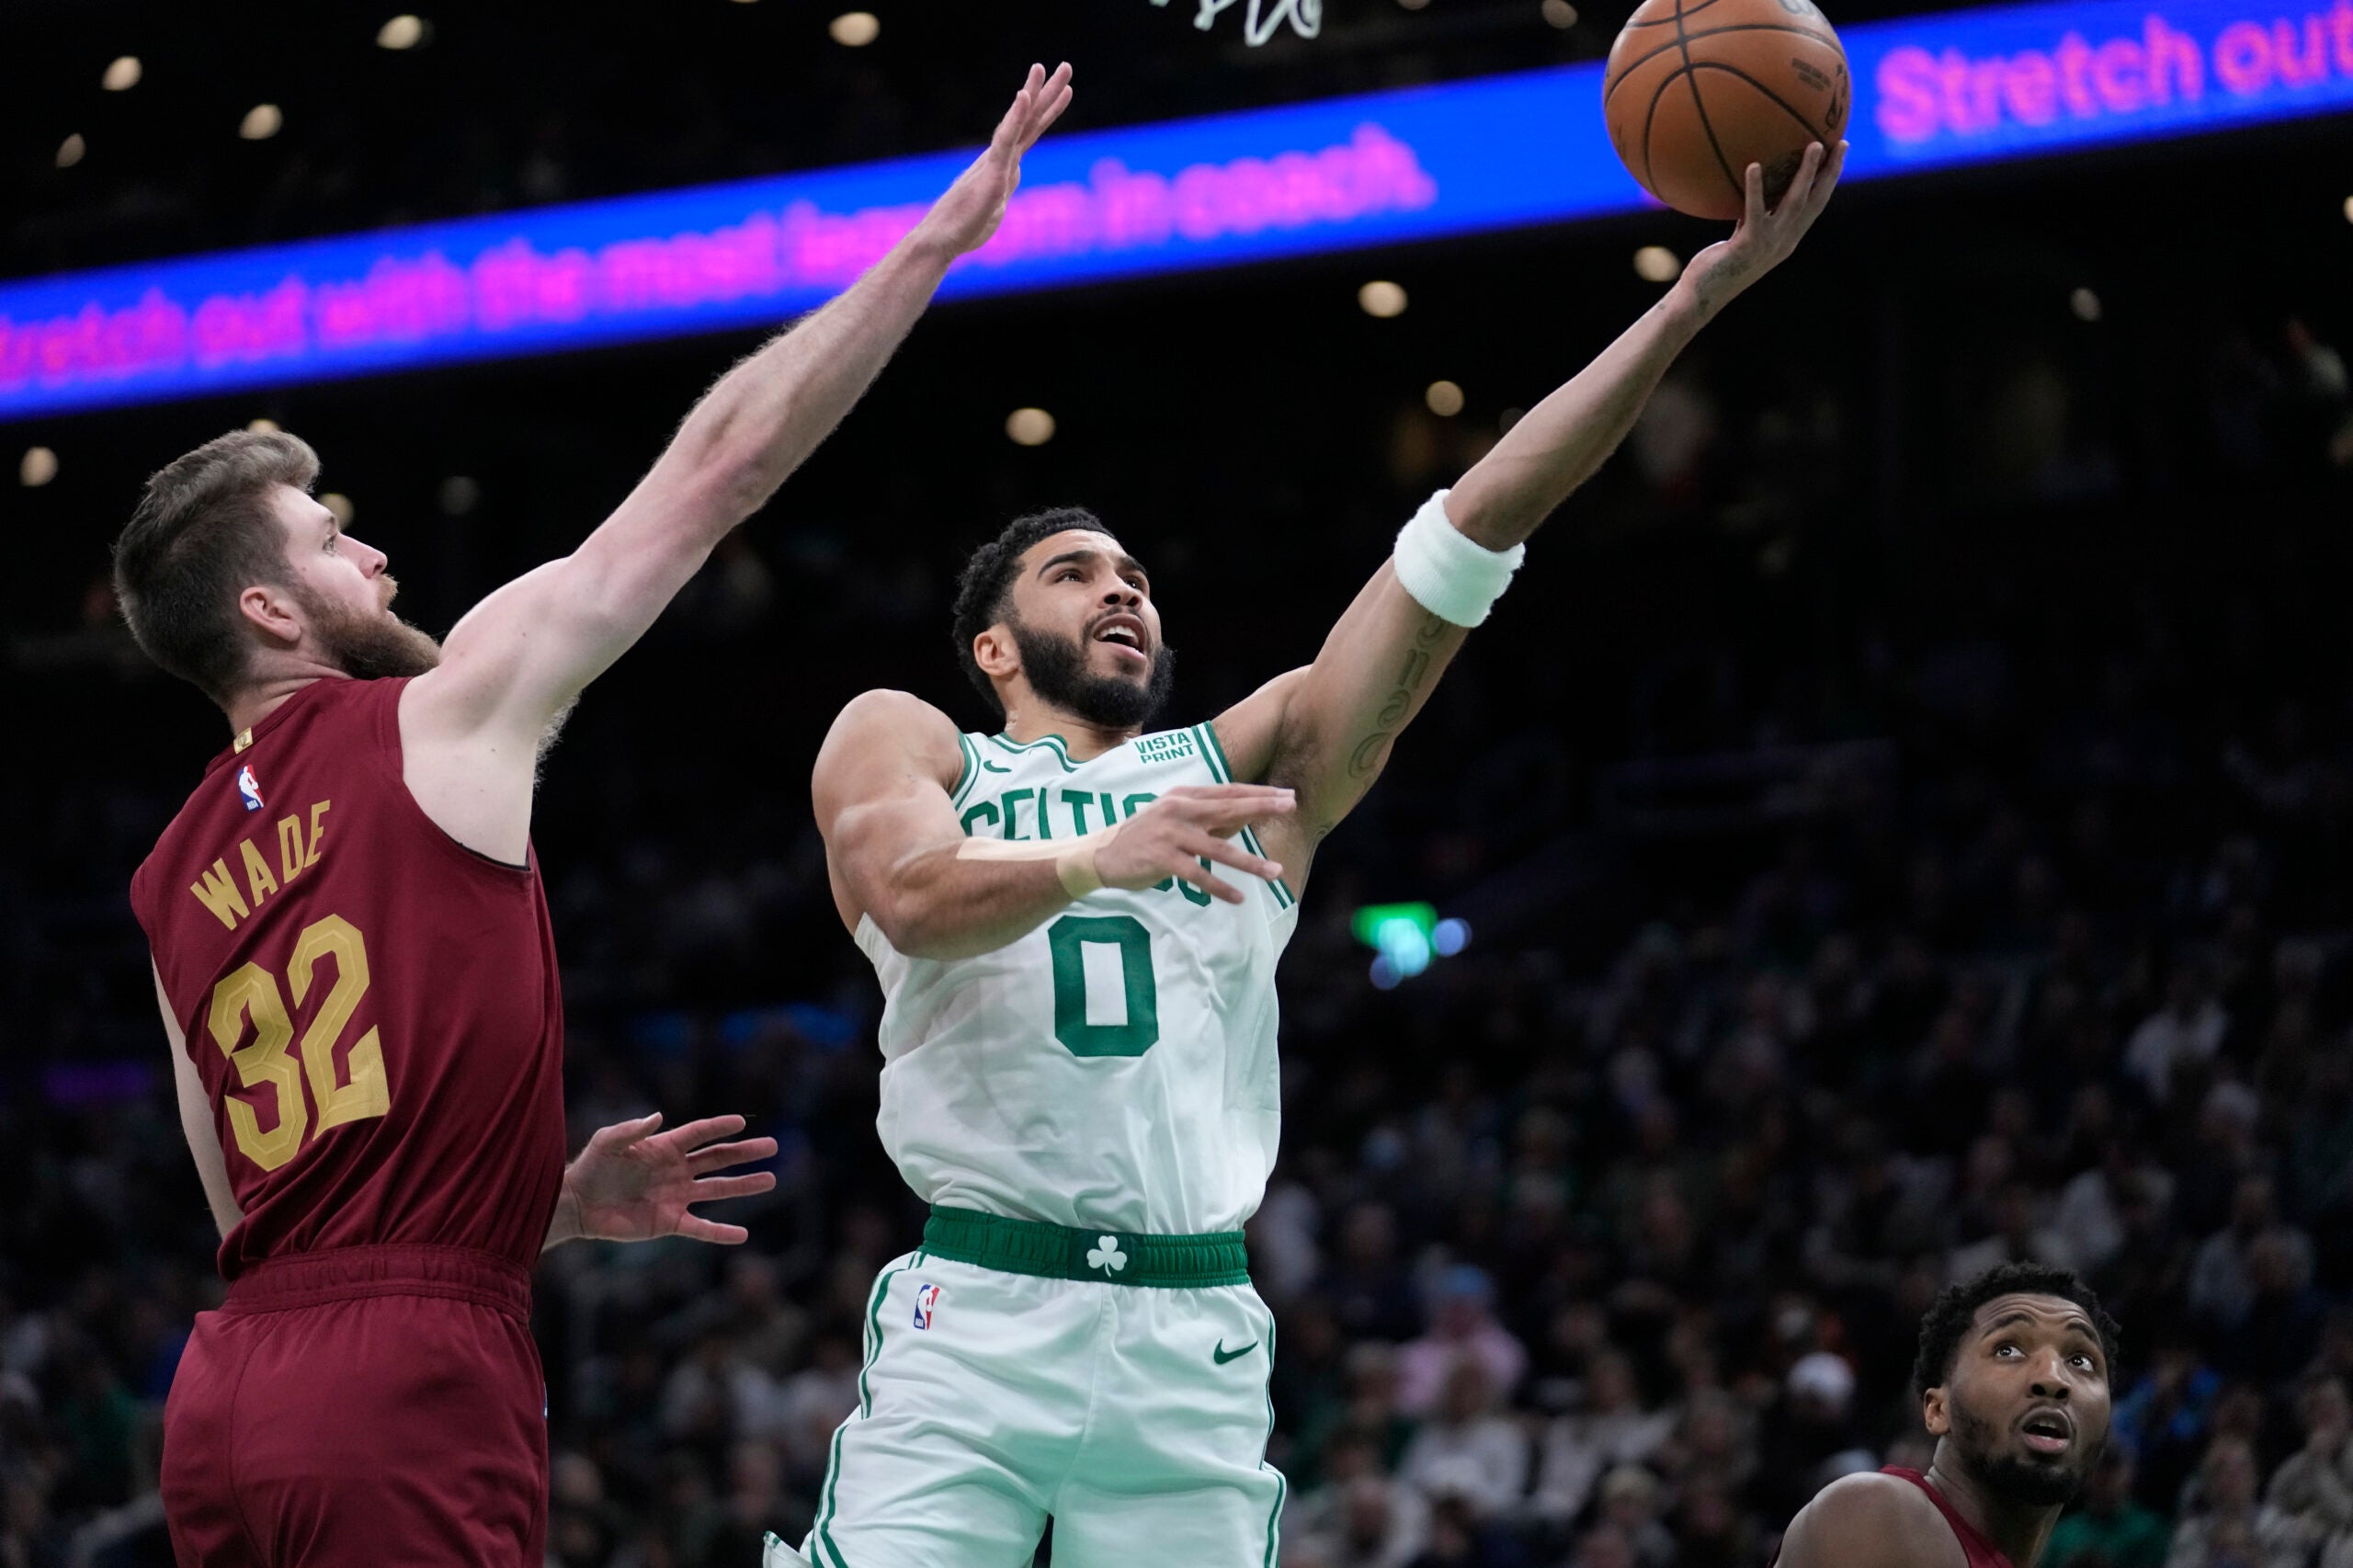 Celtics forward Jayson Tatum shoots at the basket as Cleveland Cavaliers forward Dean Wade defends in the first half.